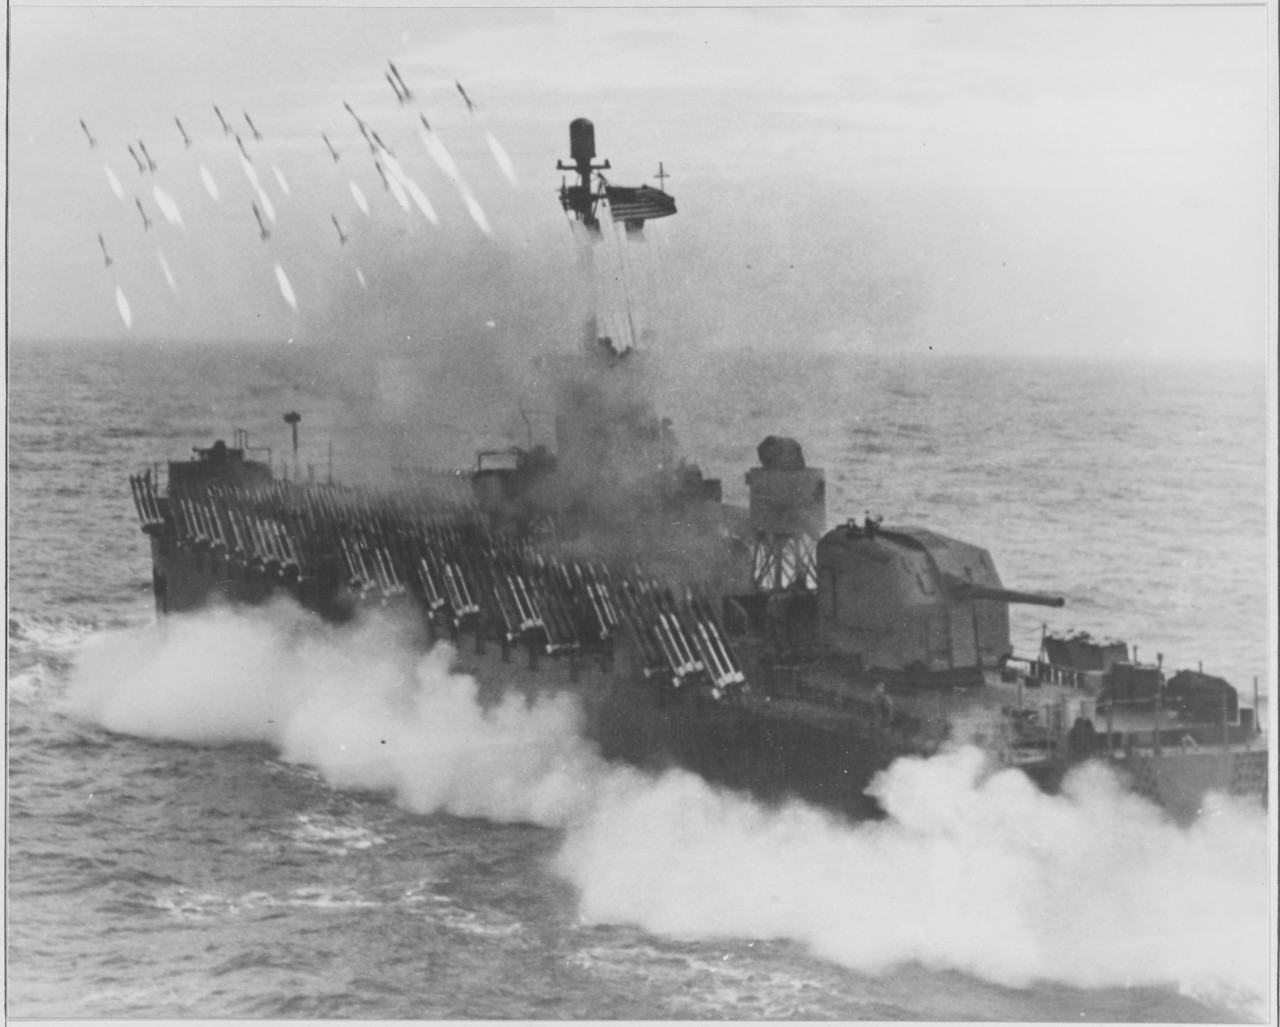 Rocket launching landing craft played an important part in blanketing enemy defenses during invasions. Rec'd. from All Hands January 1960